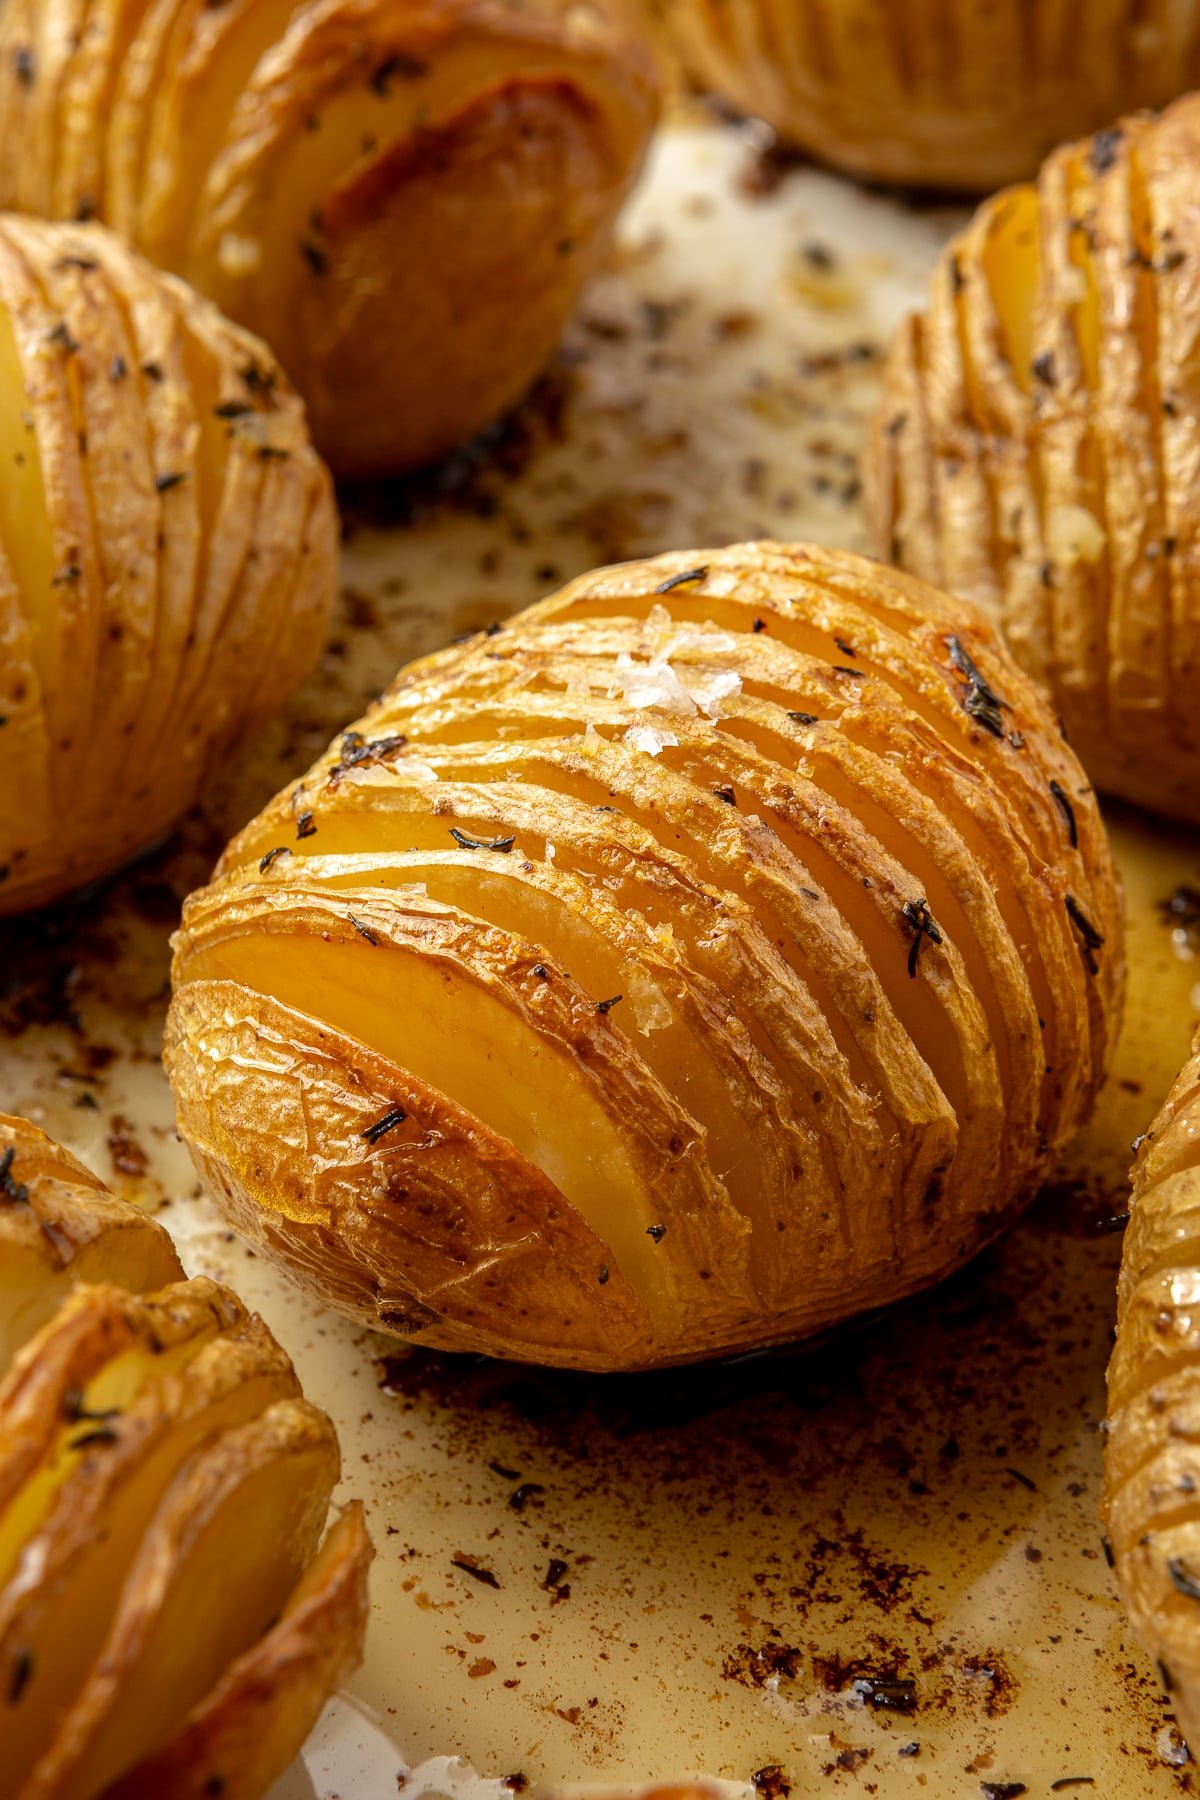 Fully baked, golden brown potatoes sit on a baking tray. Flaky salt has been sprinkled on top.